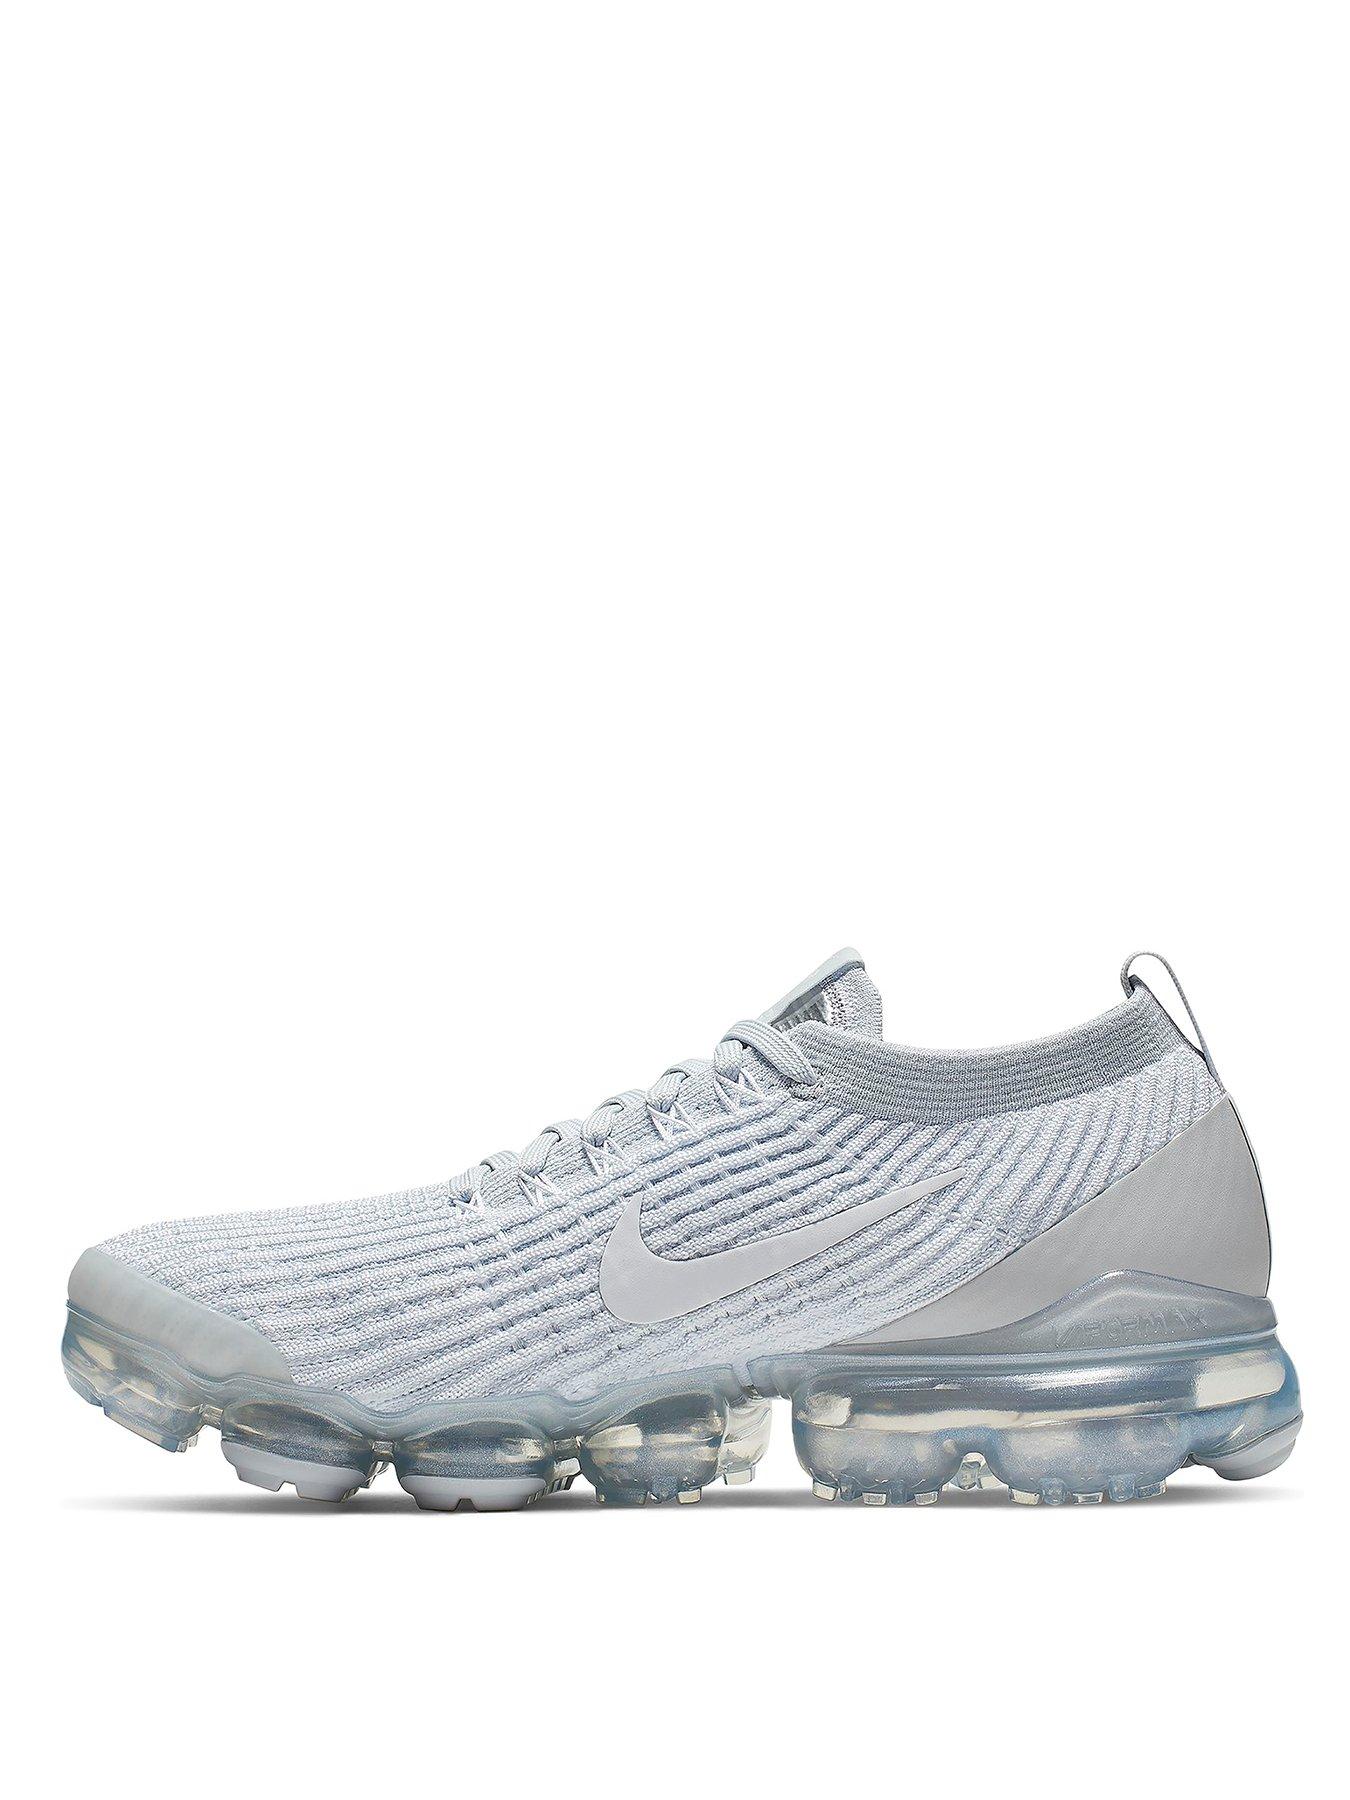 do vapormax flyknit 3 fit true to size